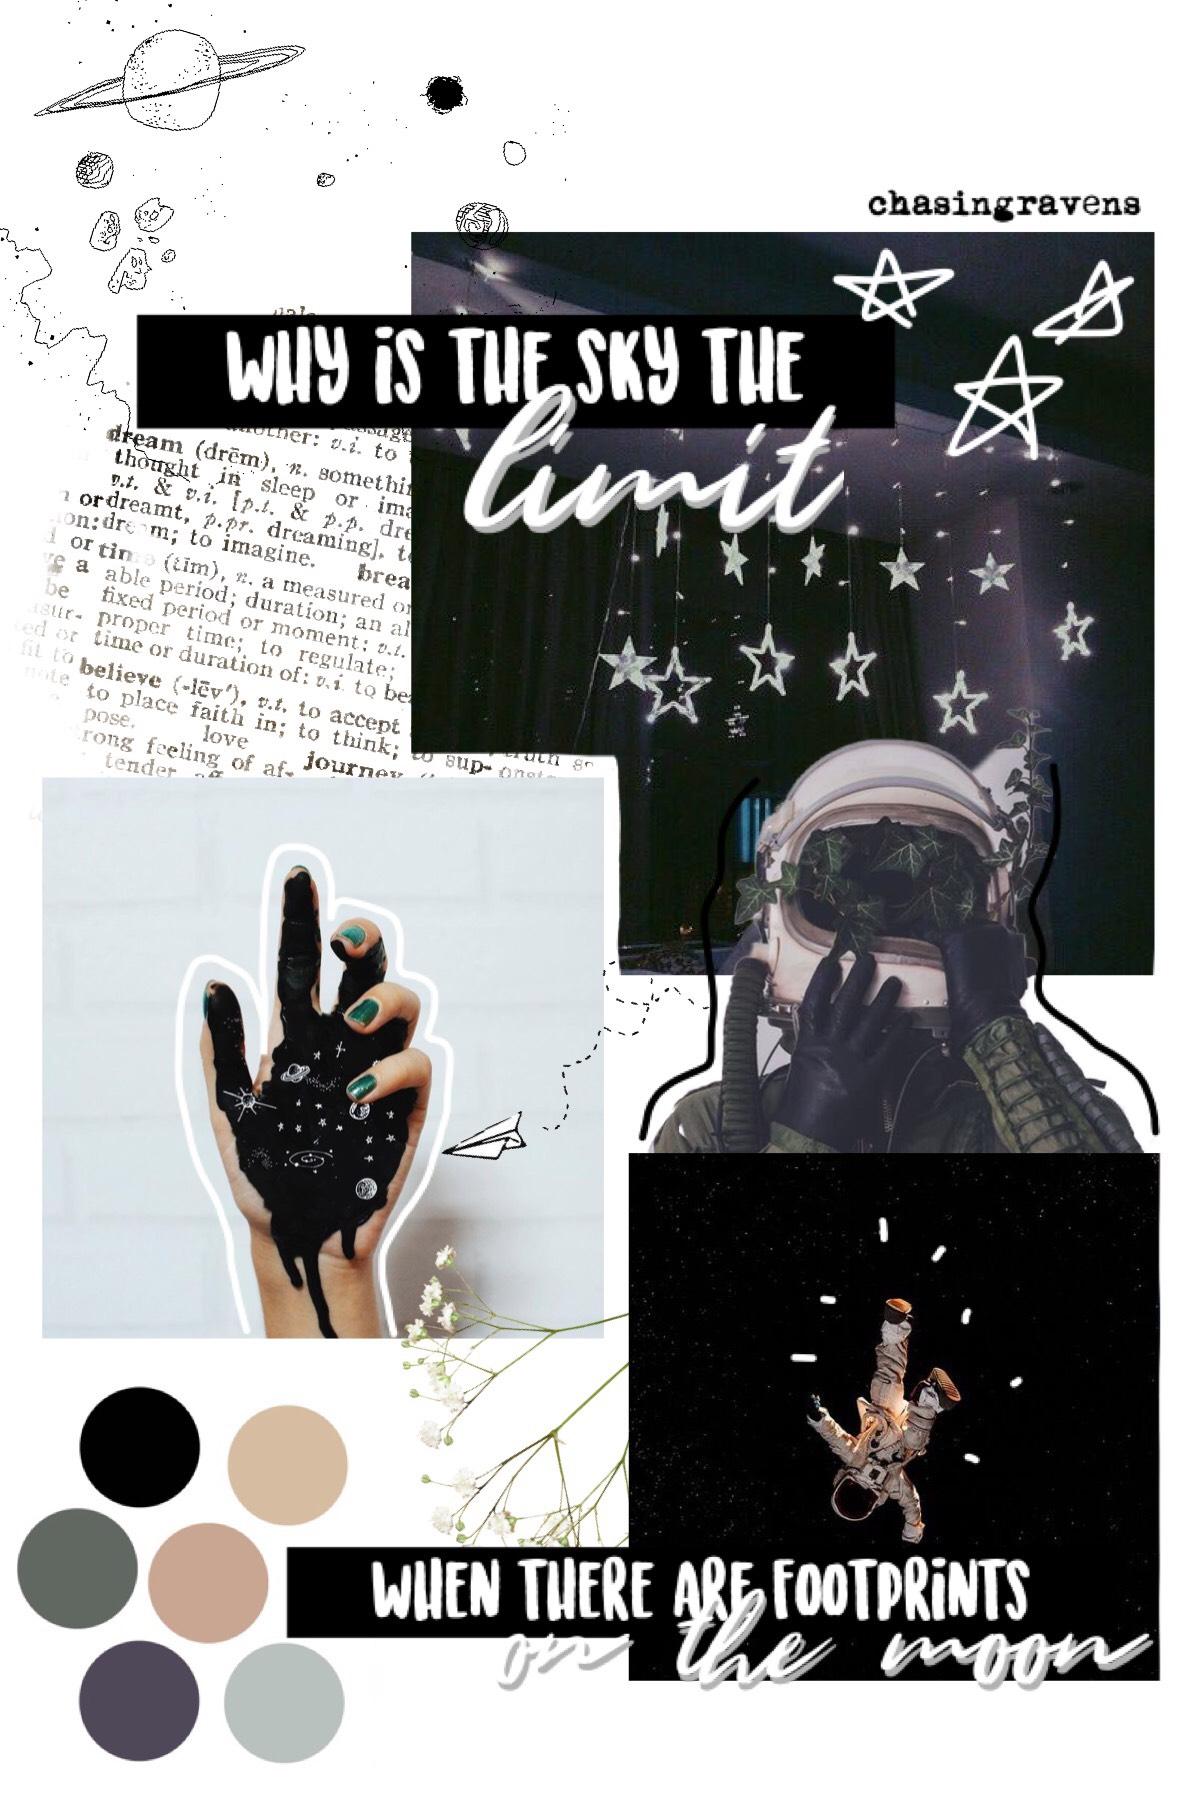 inspo from @L0VEABLE. I just love their featured collage and wanted to try the style out for myself. I just adore the results! Thoughts? 

🌙 • s p a c e • 🌙 